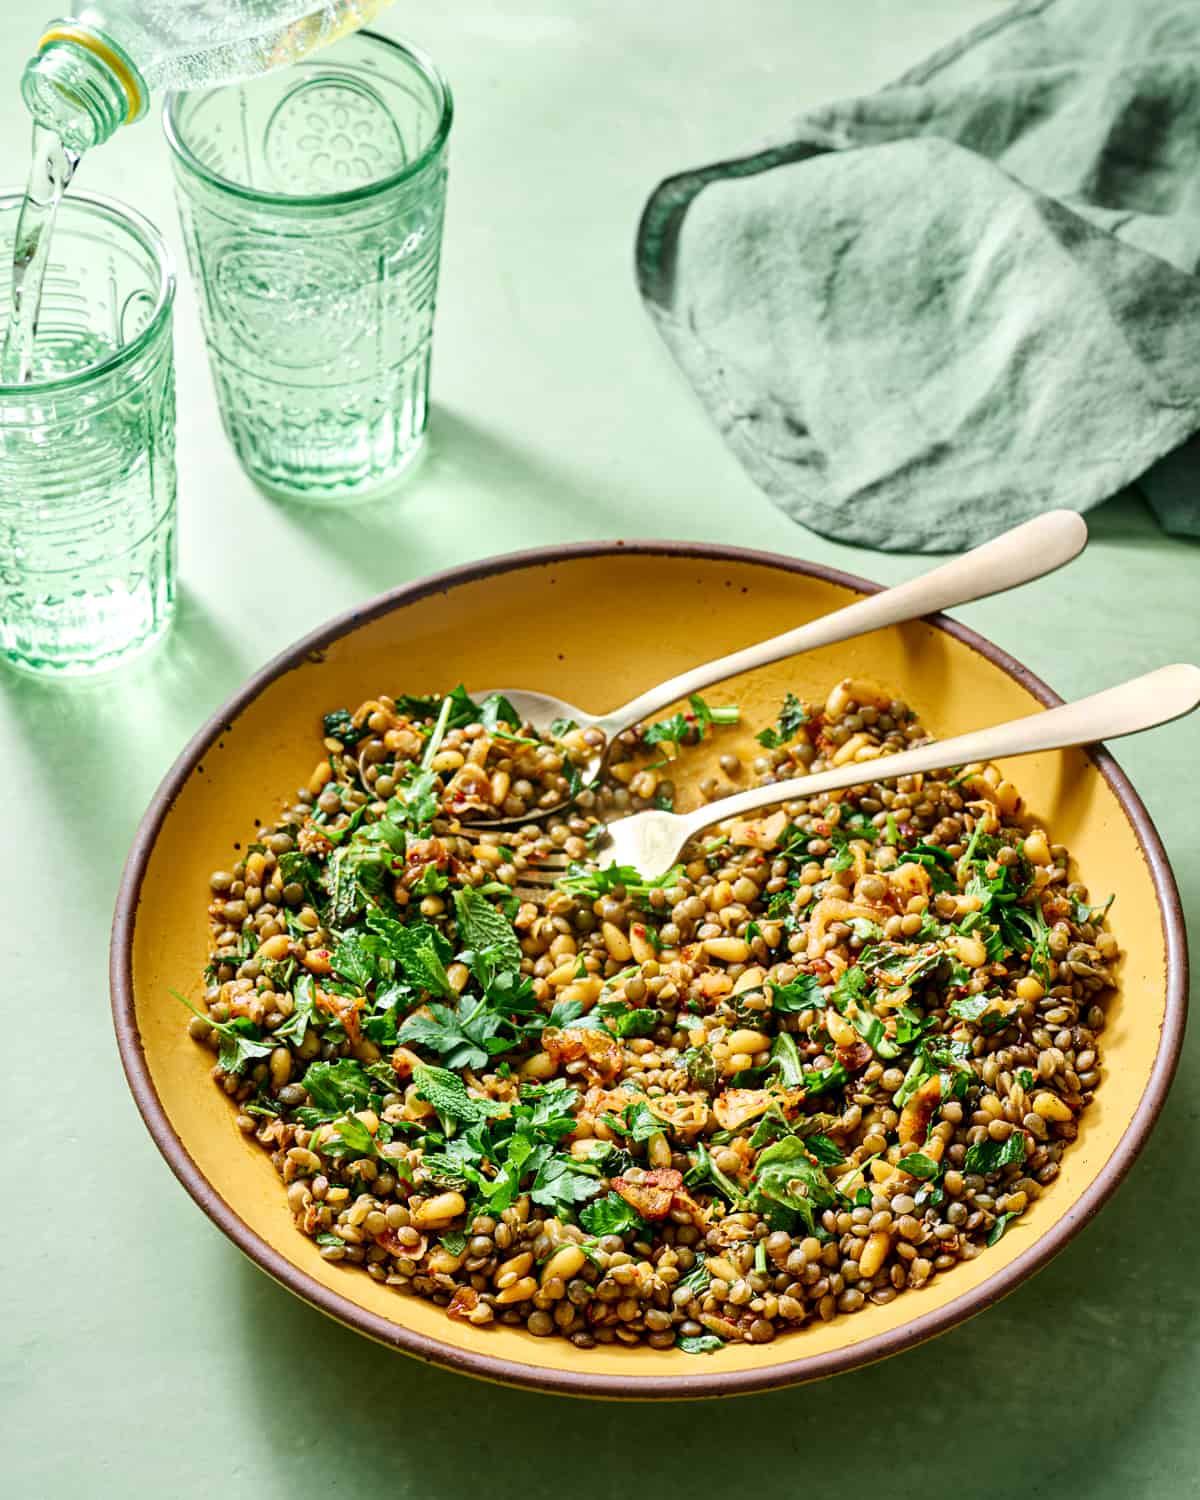 Spoon and fork in a big bowl of lentil salad on green table.